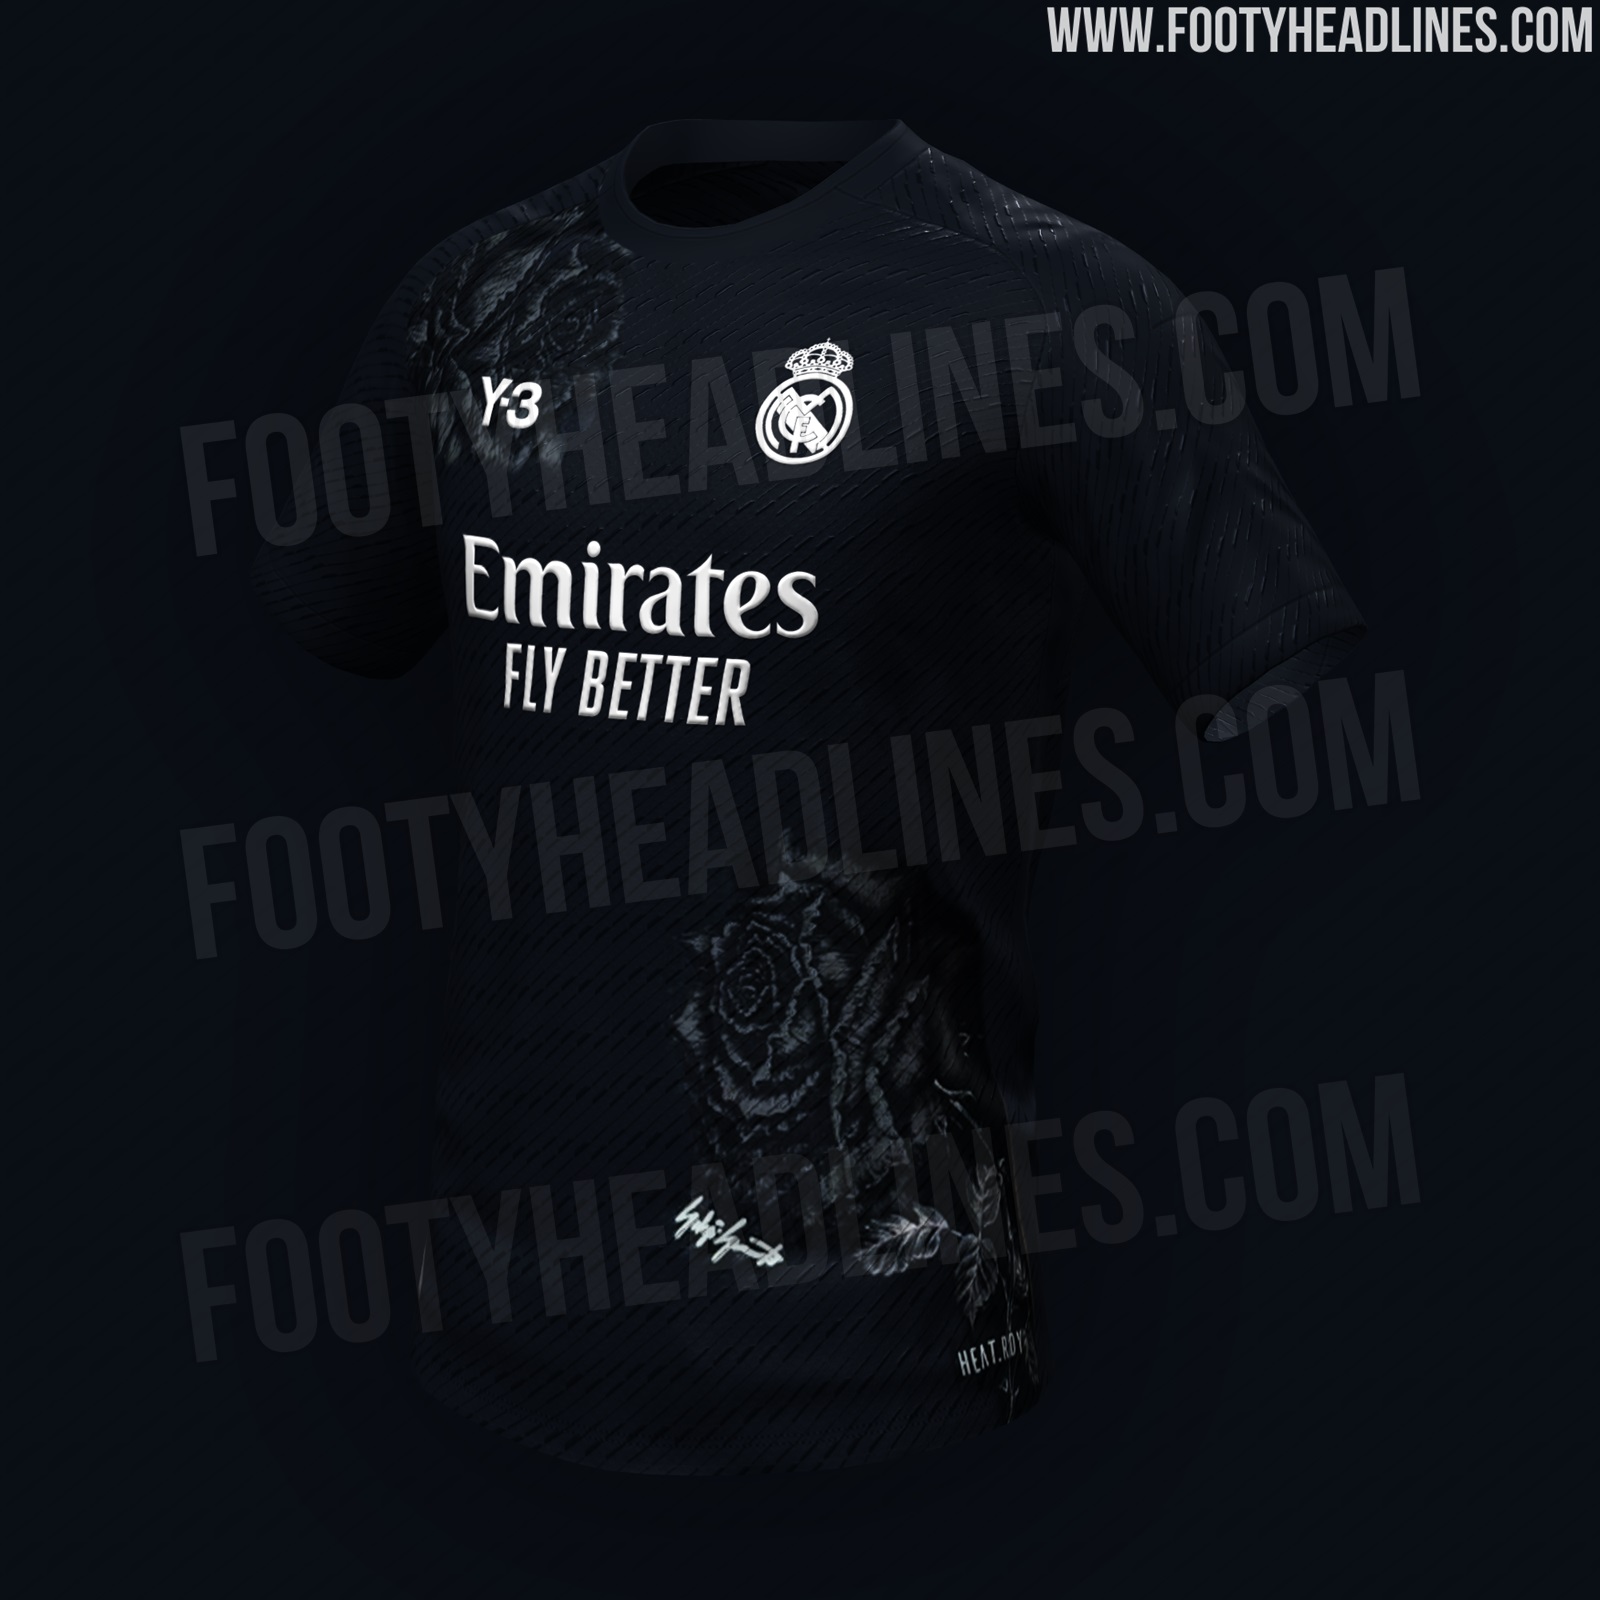 new real madrid jersey y3